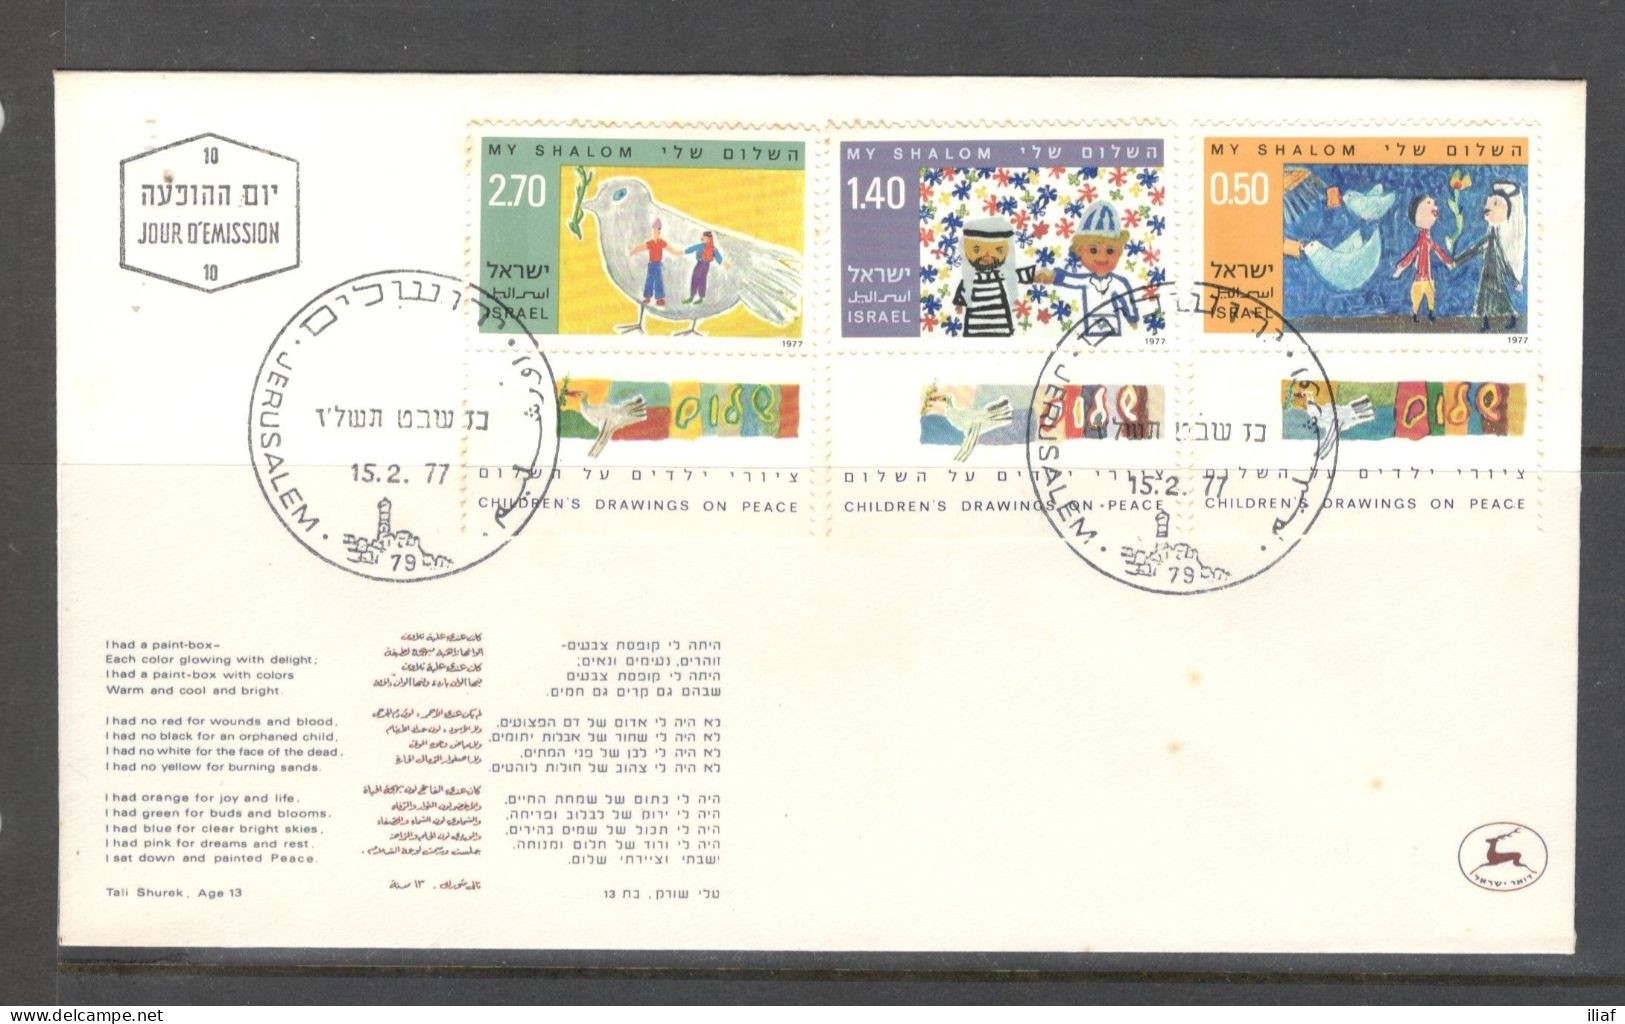 Israel 1977 FDC Sc. 622-624  Child Drawings On Peace  FDC Cancellation On Cachet FDC Envelope - FDC